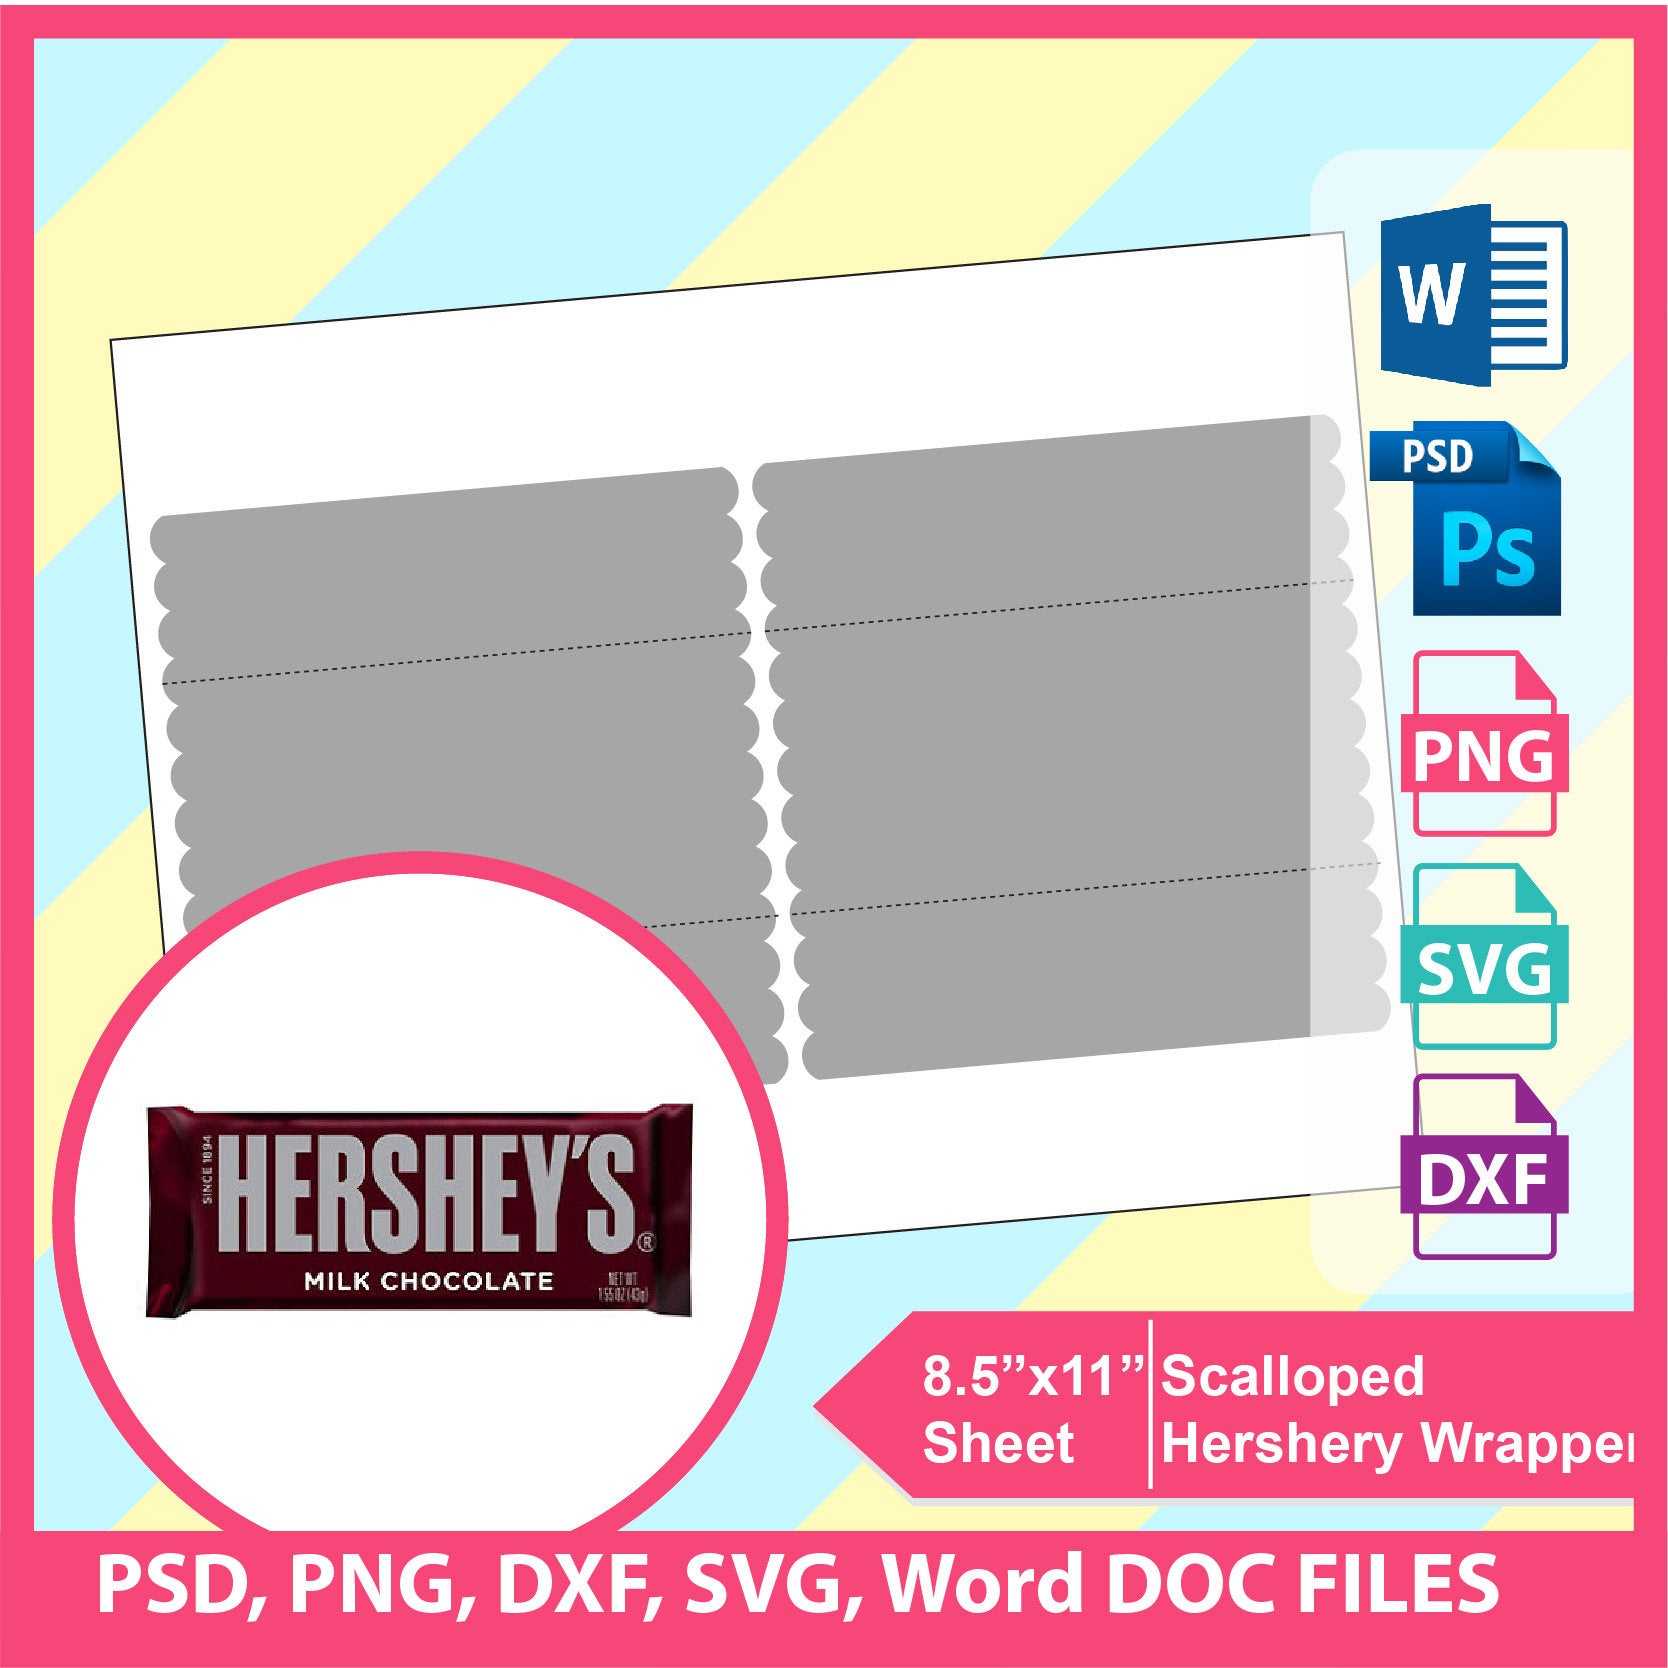 Scalloped Hershey Candy Bar Wrapper Template, Psd, Png And Svg, Dxf, Doc  Microsoft Word Formats, 8.5X11" Sheet, Printable 672 Intended For Blank Candy Bar Wrapper Template For Word